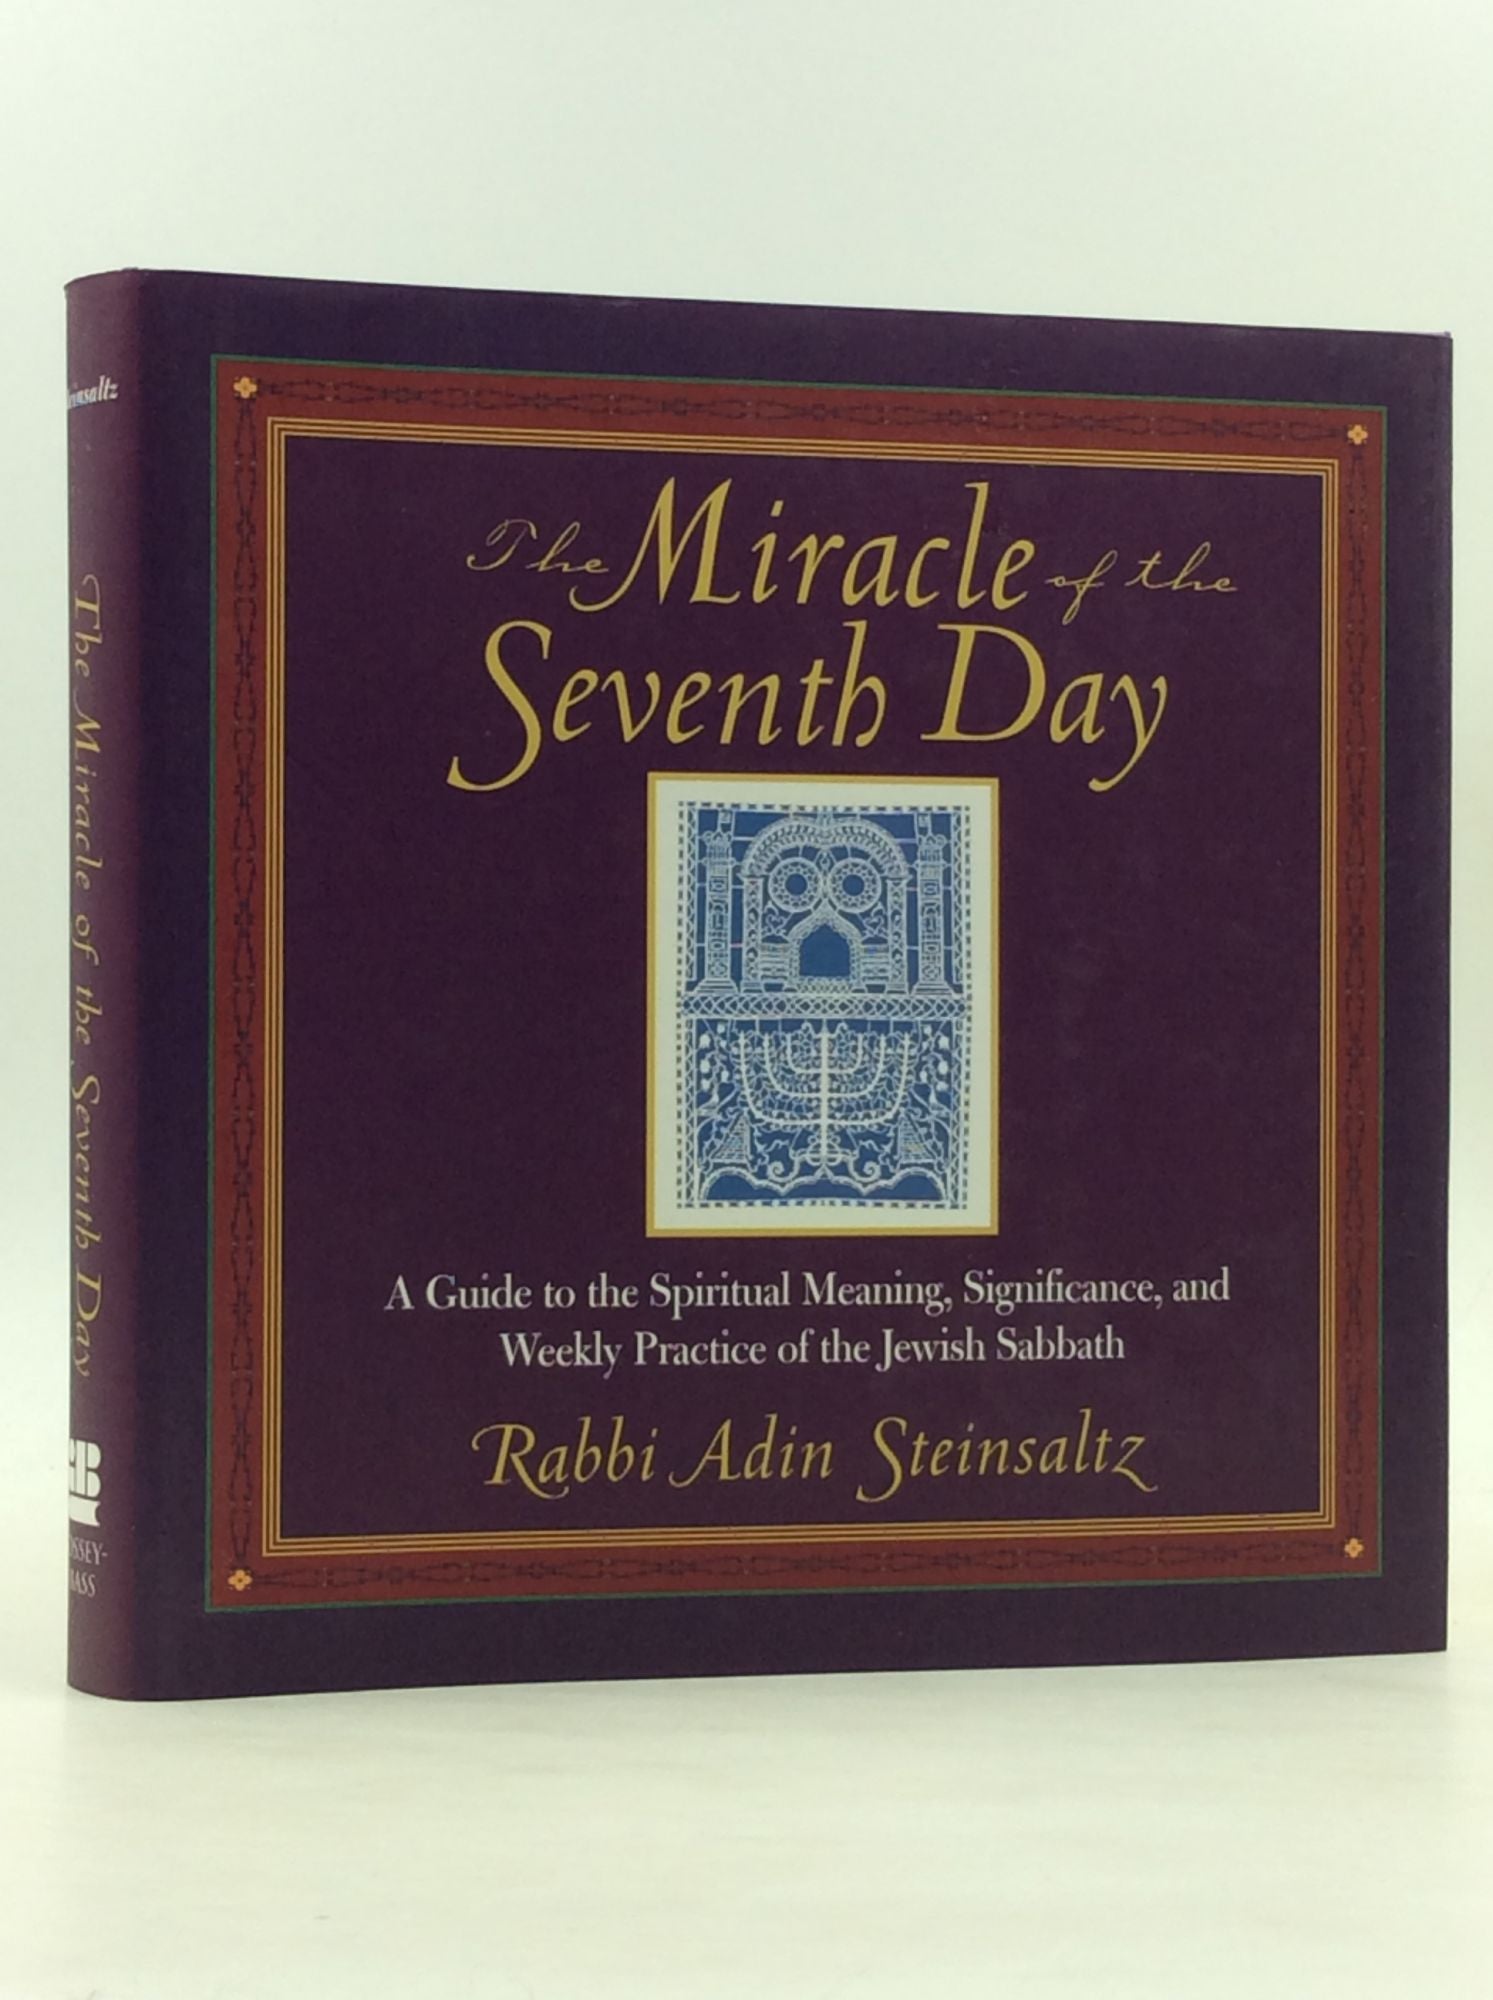 Rabbi Adin Steinsaltz - The Miracle of the Seventh Day: A Guide to the Spiritual Meaning, Significance, and Weekly Practice of the Jewish Sabbath